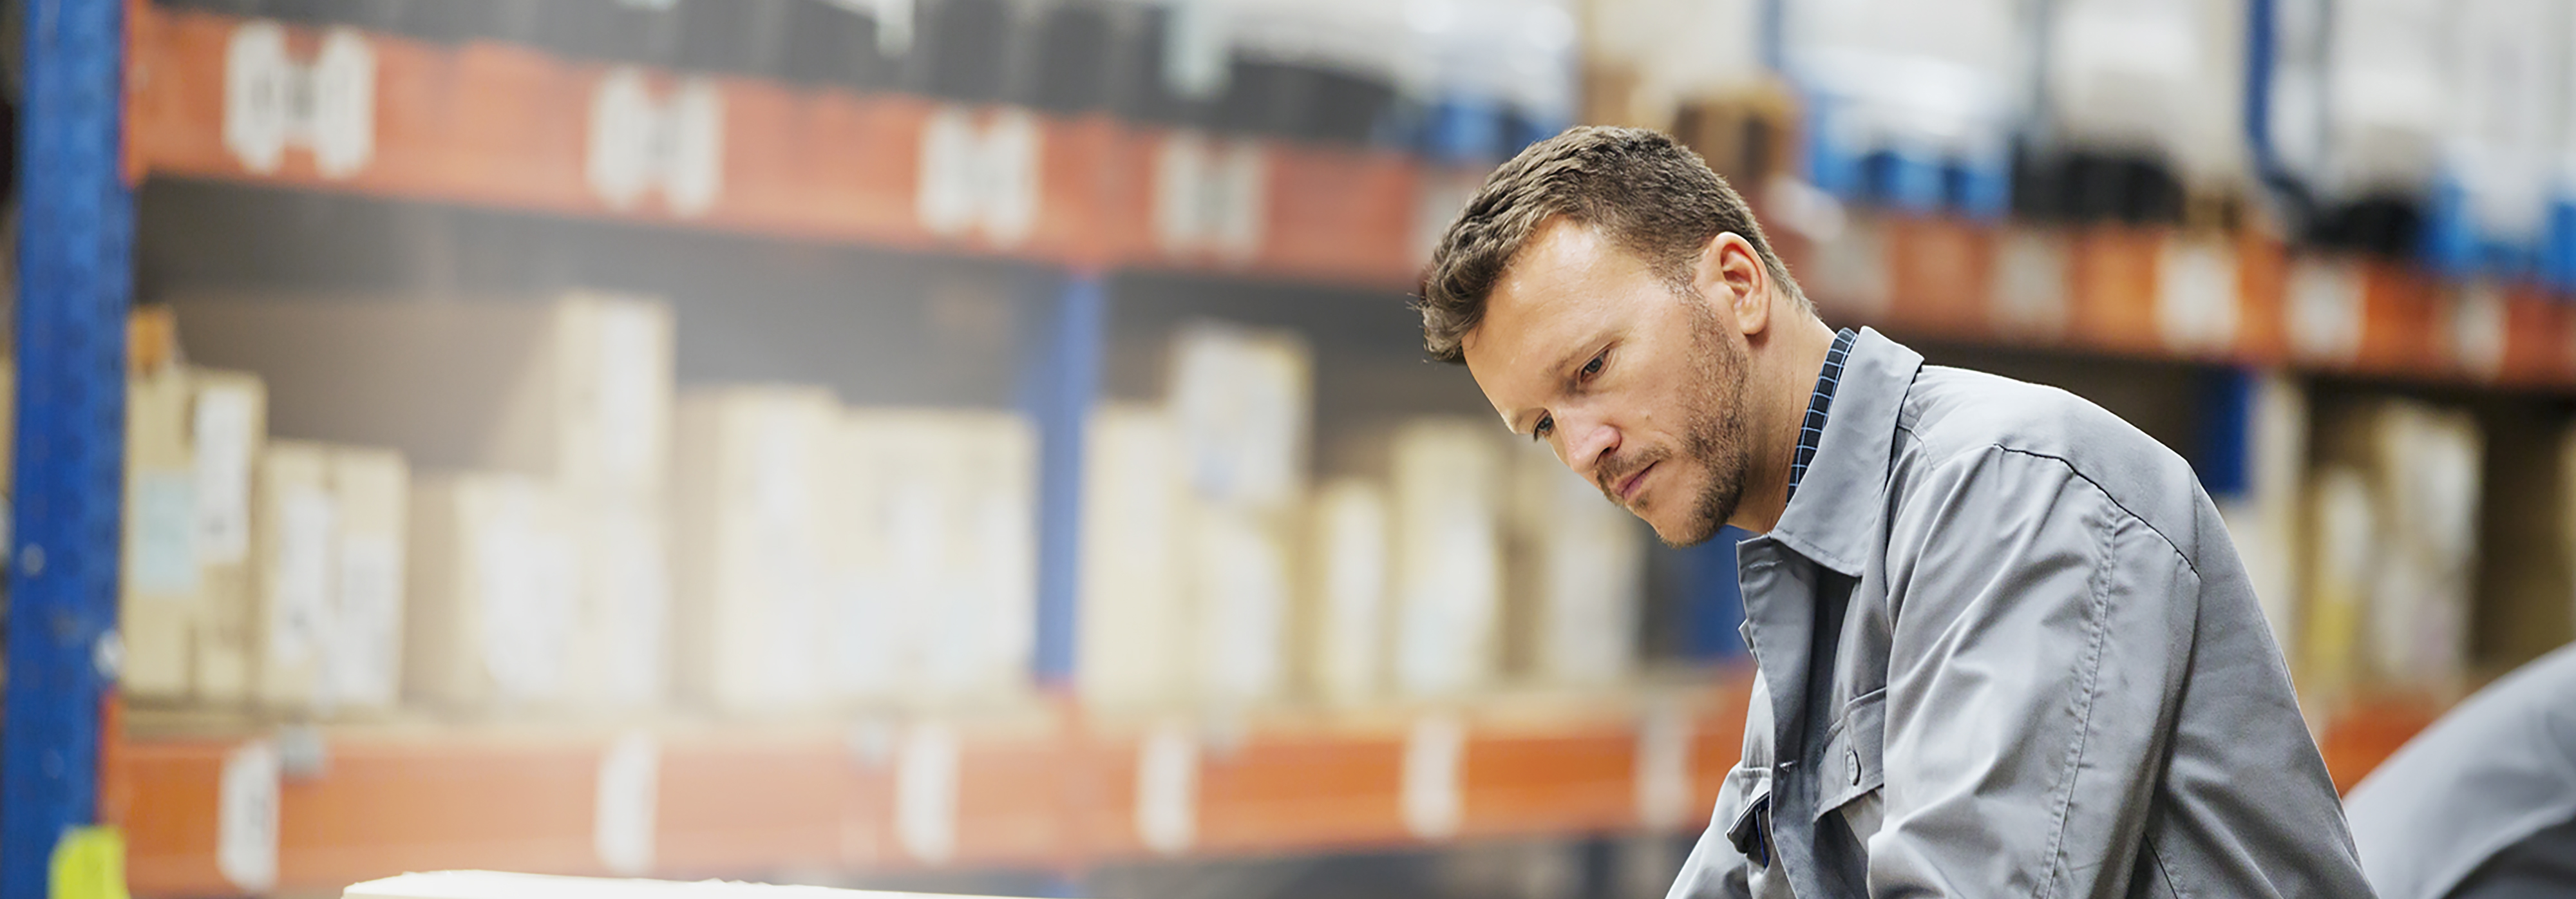 Image of a man with a beard at a hardware store